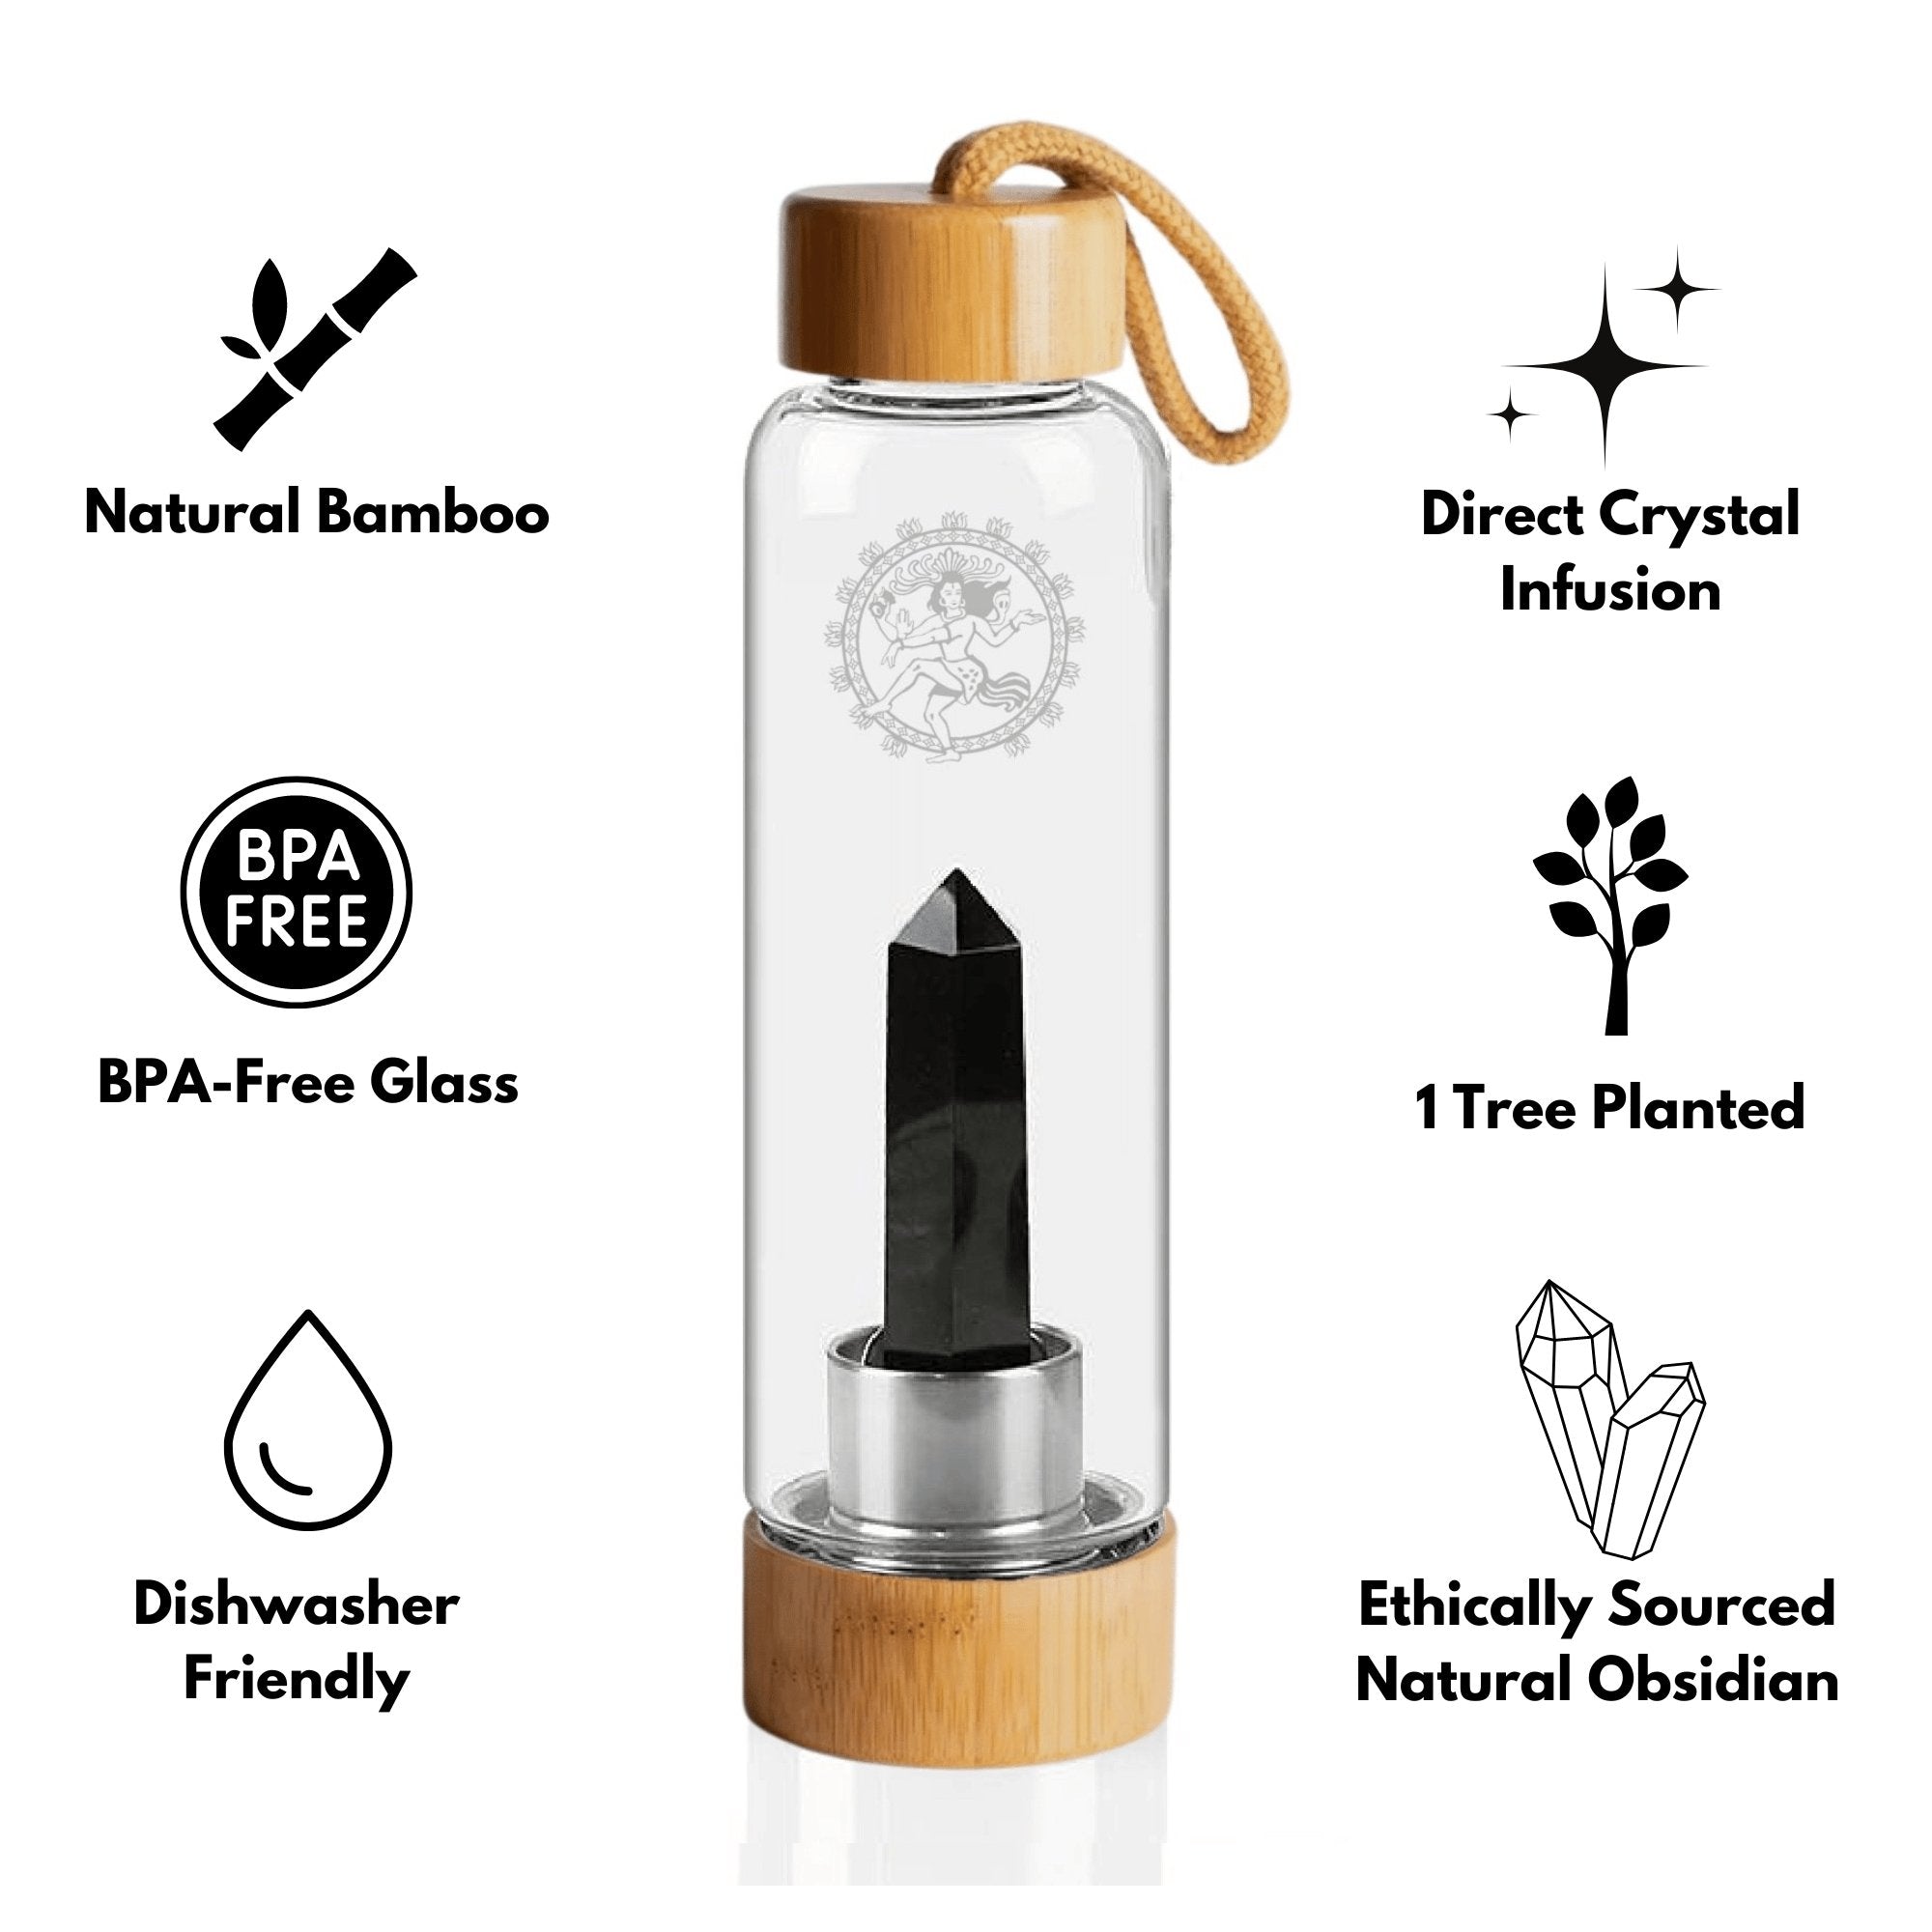 Bamboo Obsidian Crystal Water Bottle Infographic